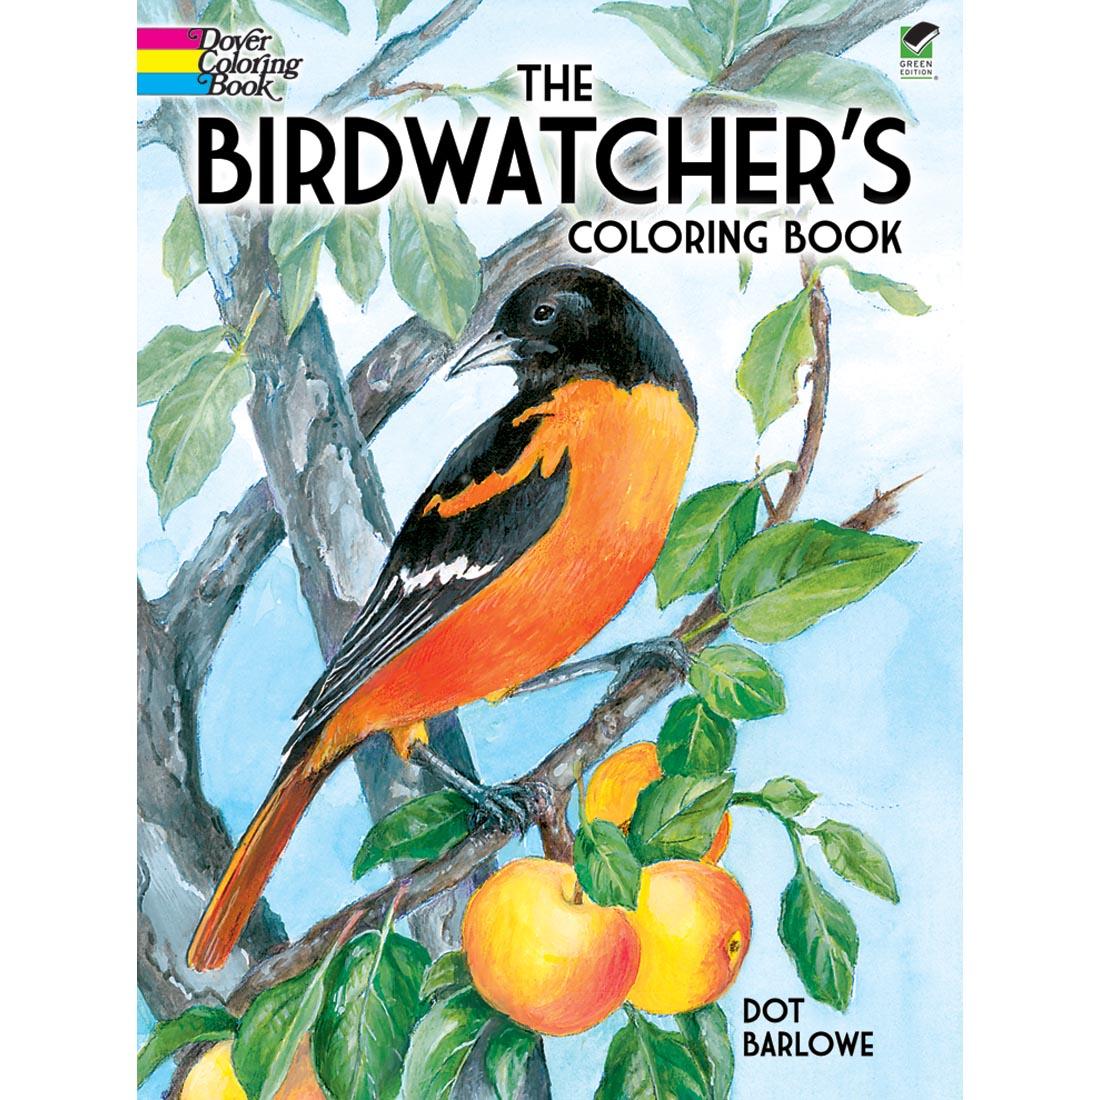 The Birdwatcher's Coloring Book by Dover